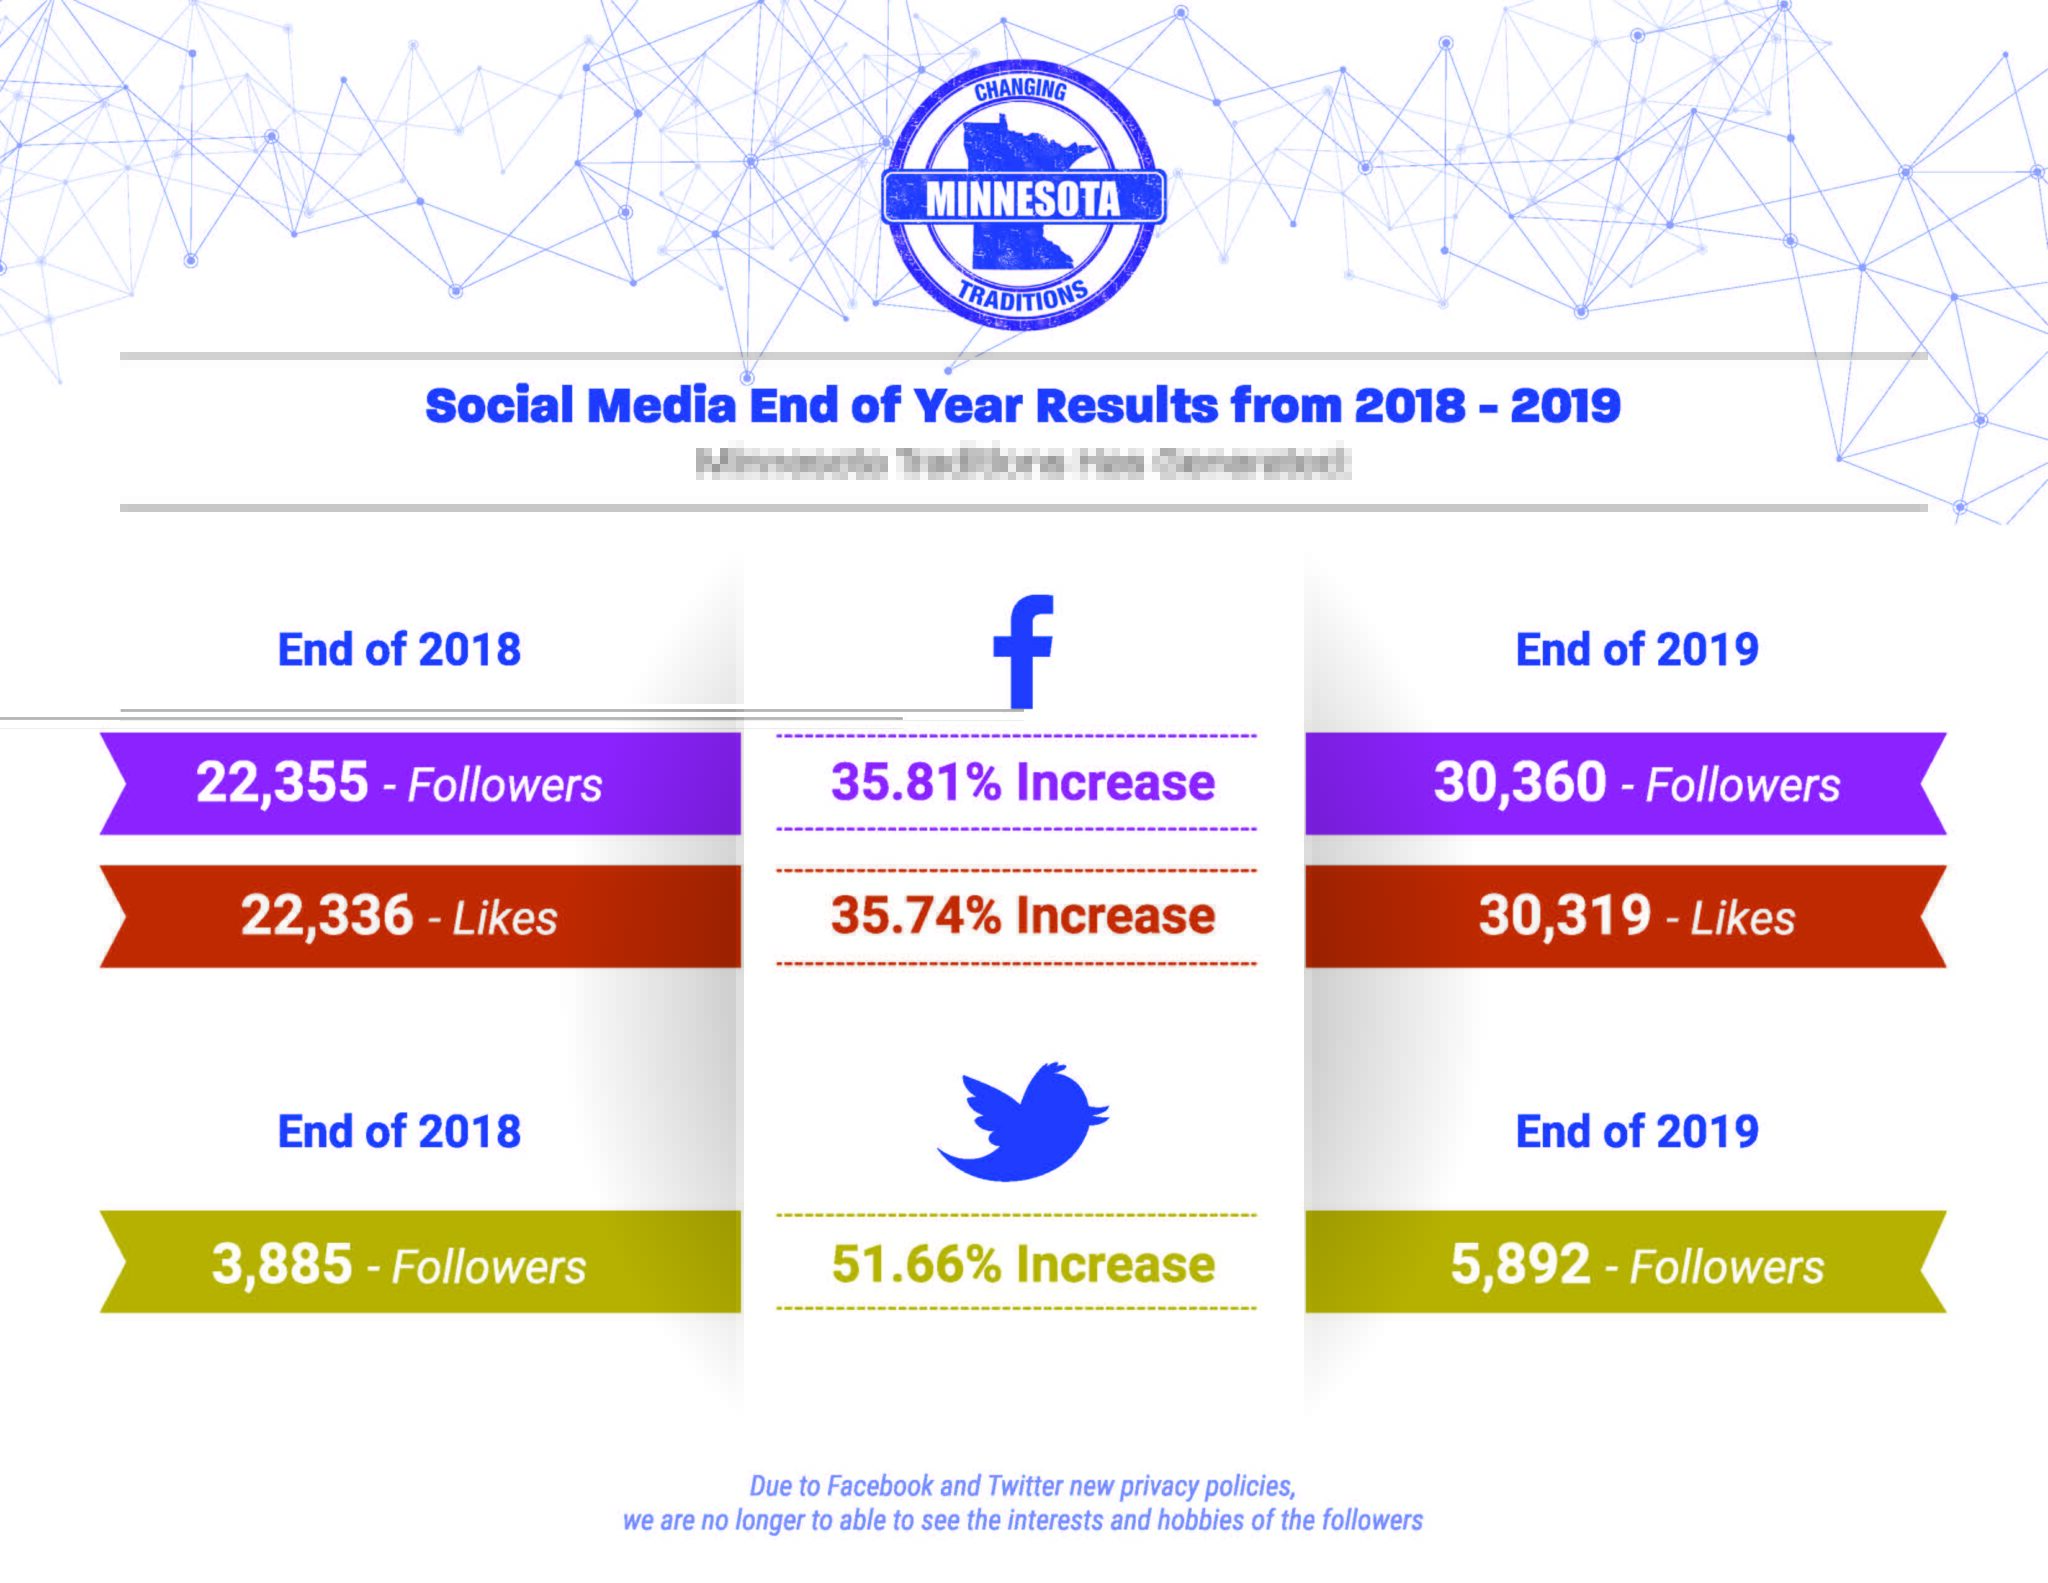 Minnesota Traditions social media end of year growth overview chart